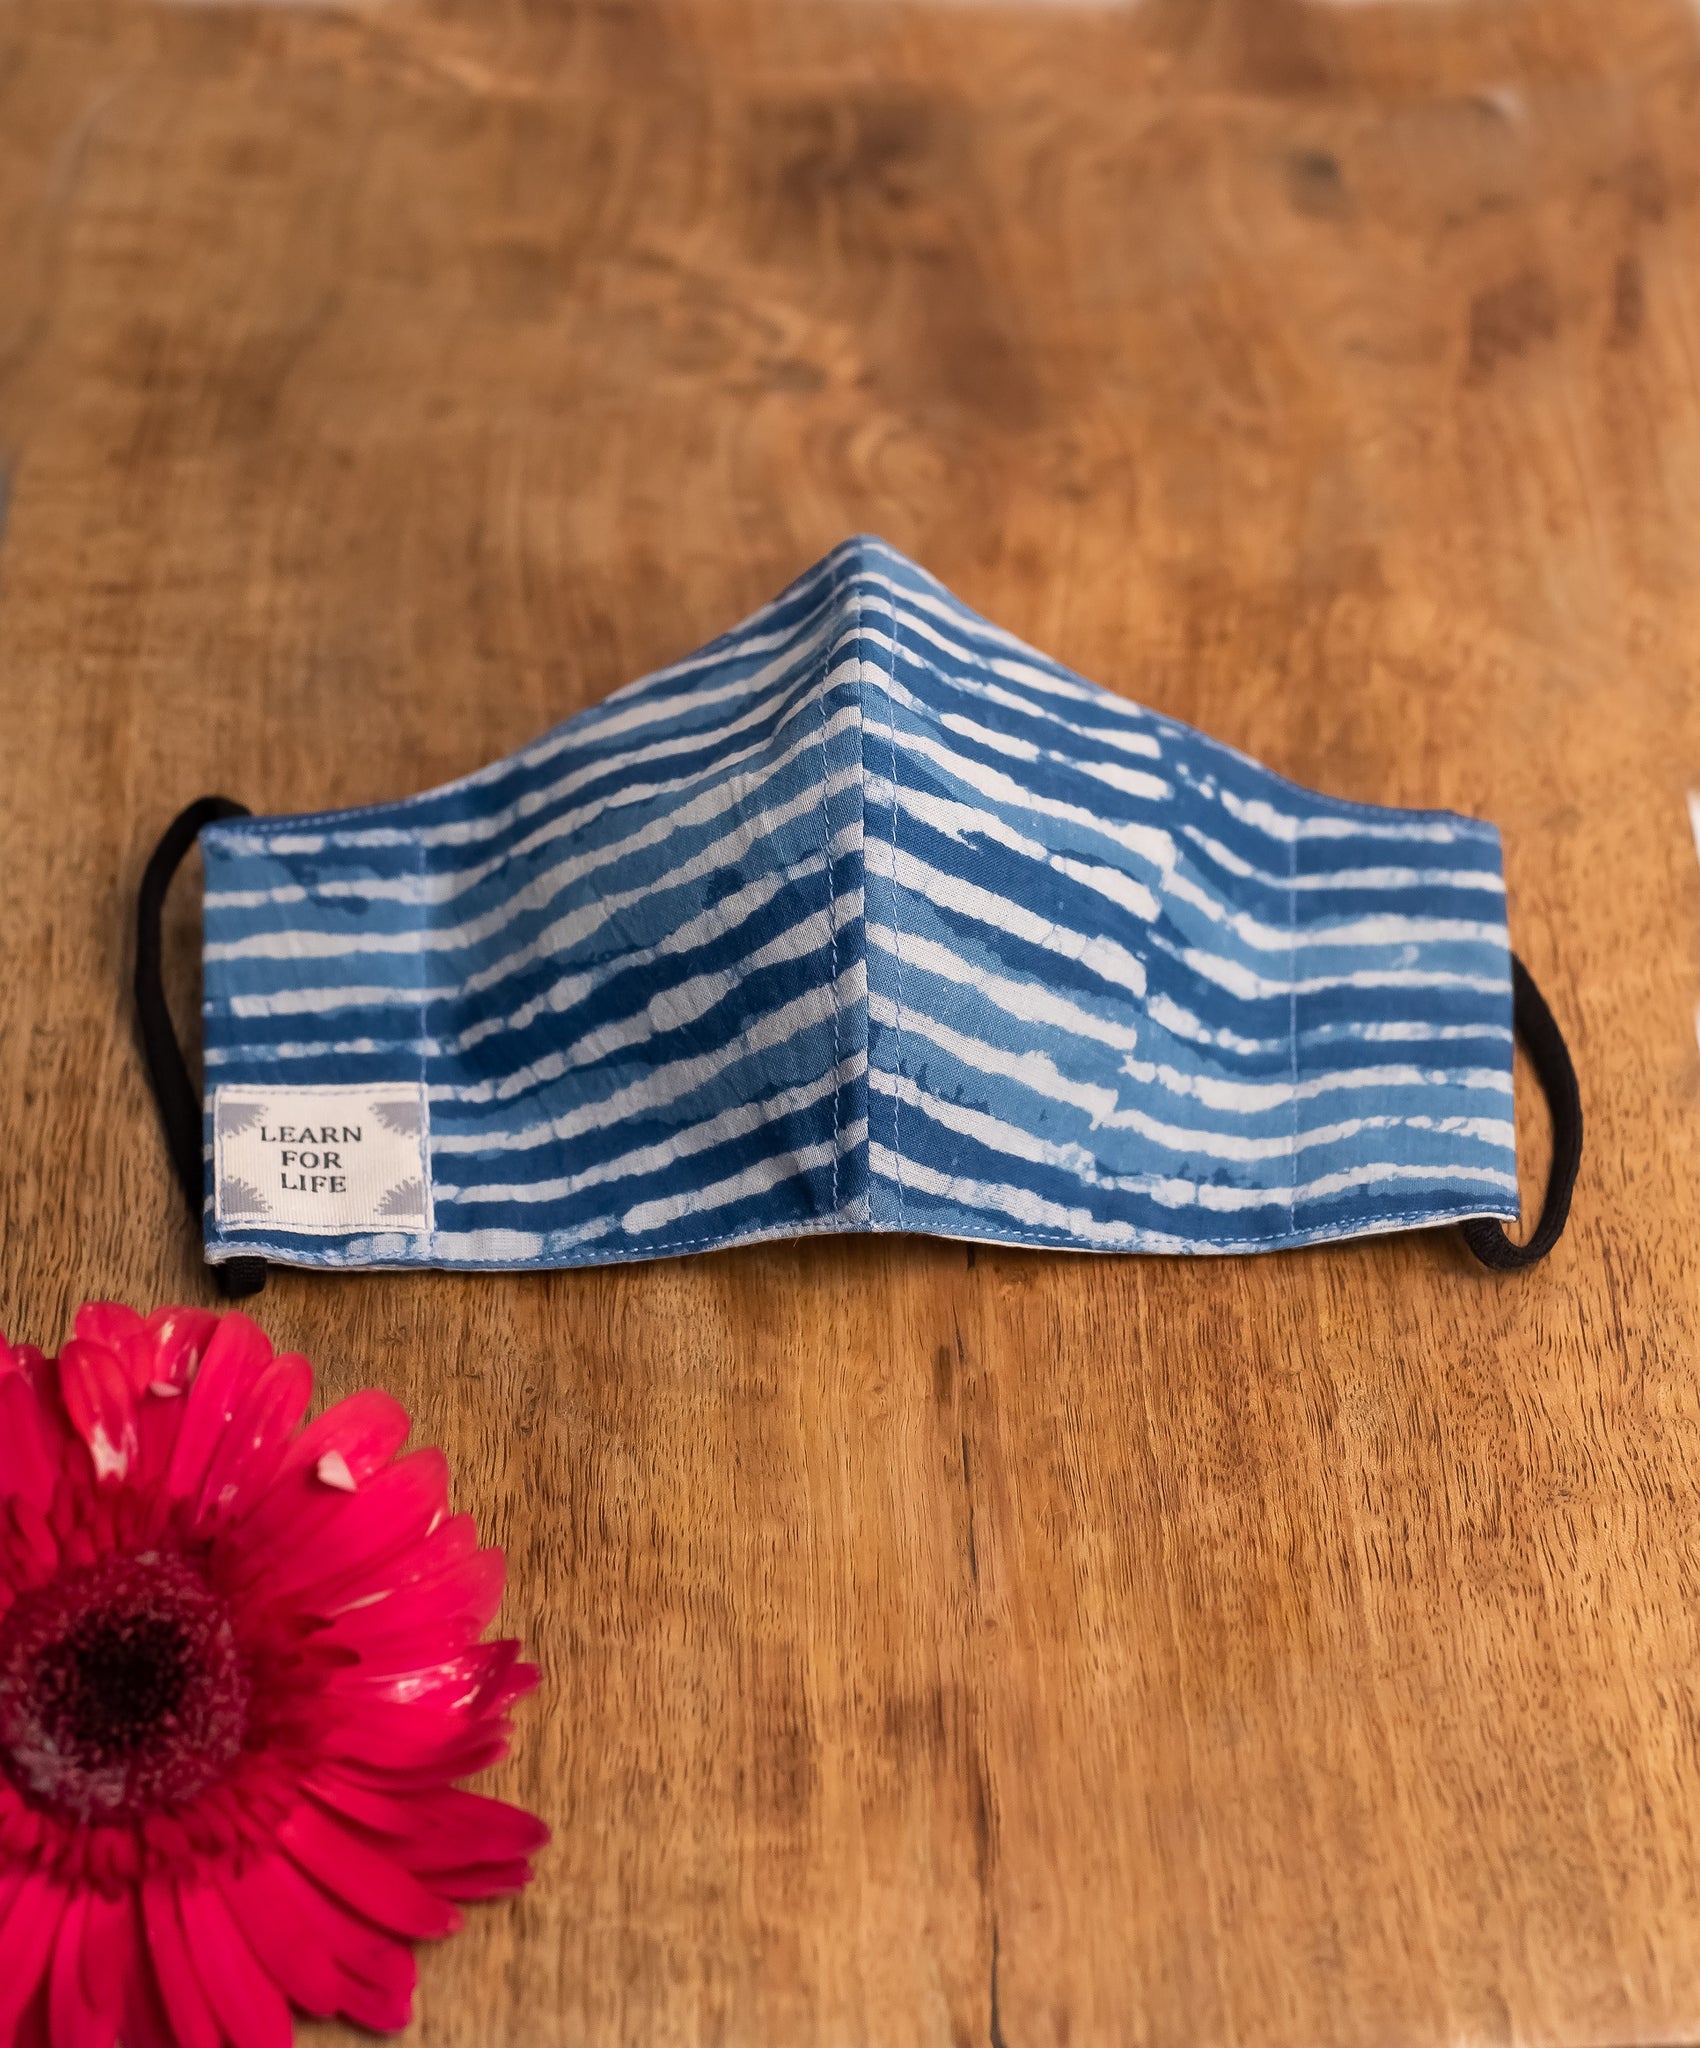 Round Face Mask for Children with Natural dye - Blues Stripes Motif Hand-Block Printed Cotton